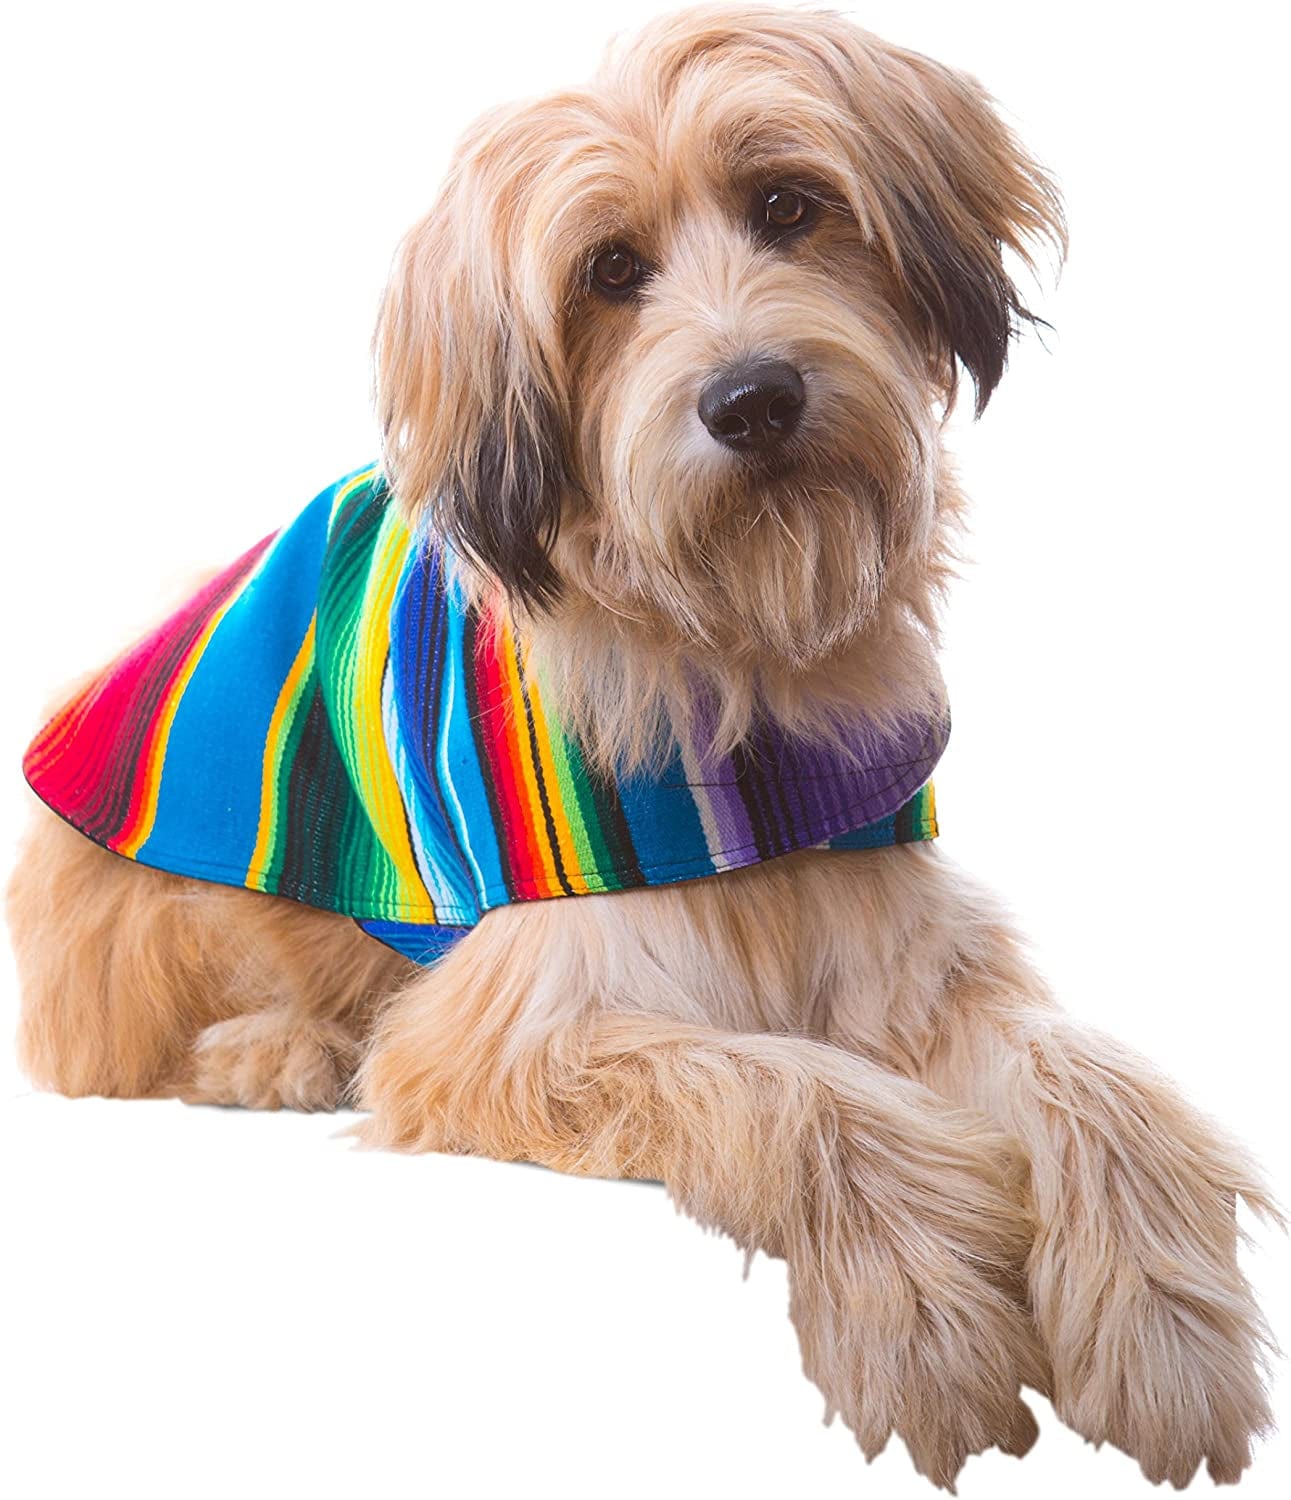 Dog Clothes - Handmade Dog Poncho - Cinco De Mayo Chihuahua Costume from Authentic Mexican Blanket (Blue, XXS) Animals & Pet Supplies > Pet Supplies > Dog Supplies > Dog Apparel Baja Ponchos Blue Large 